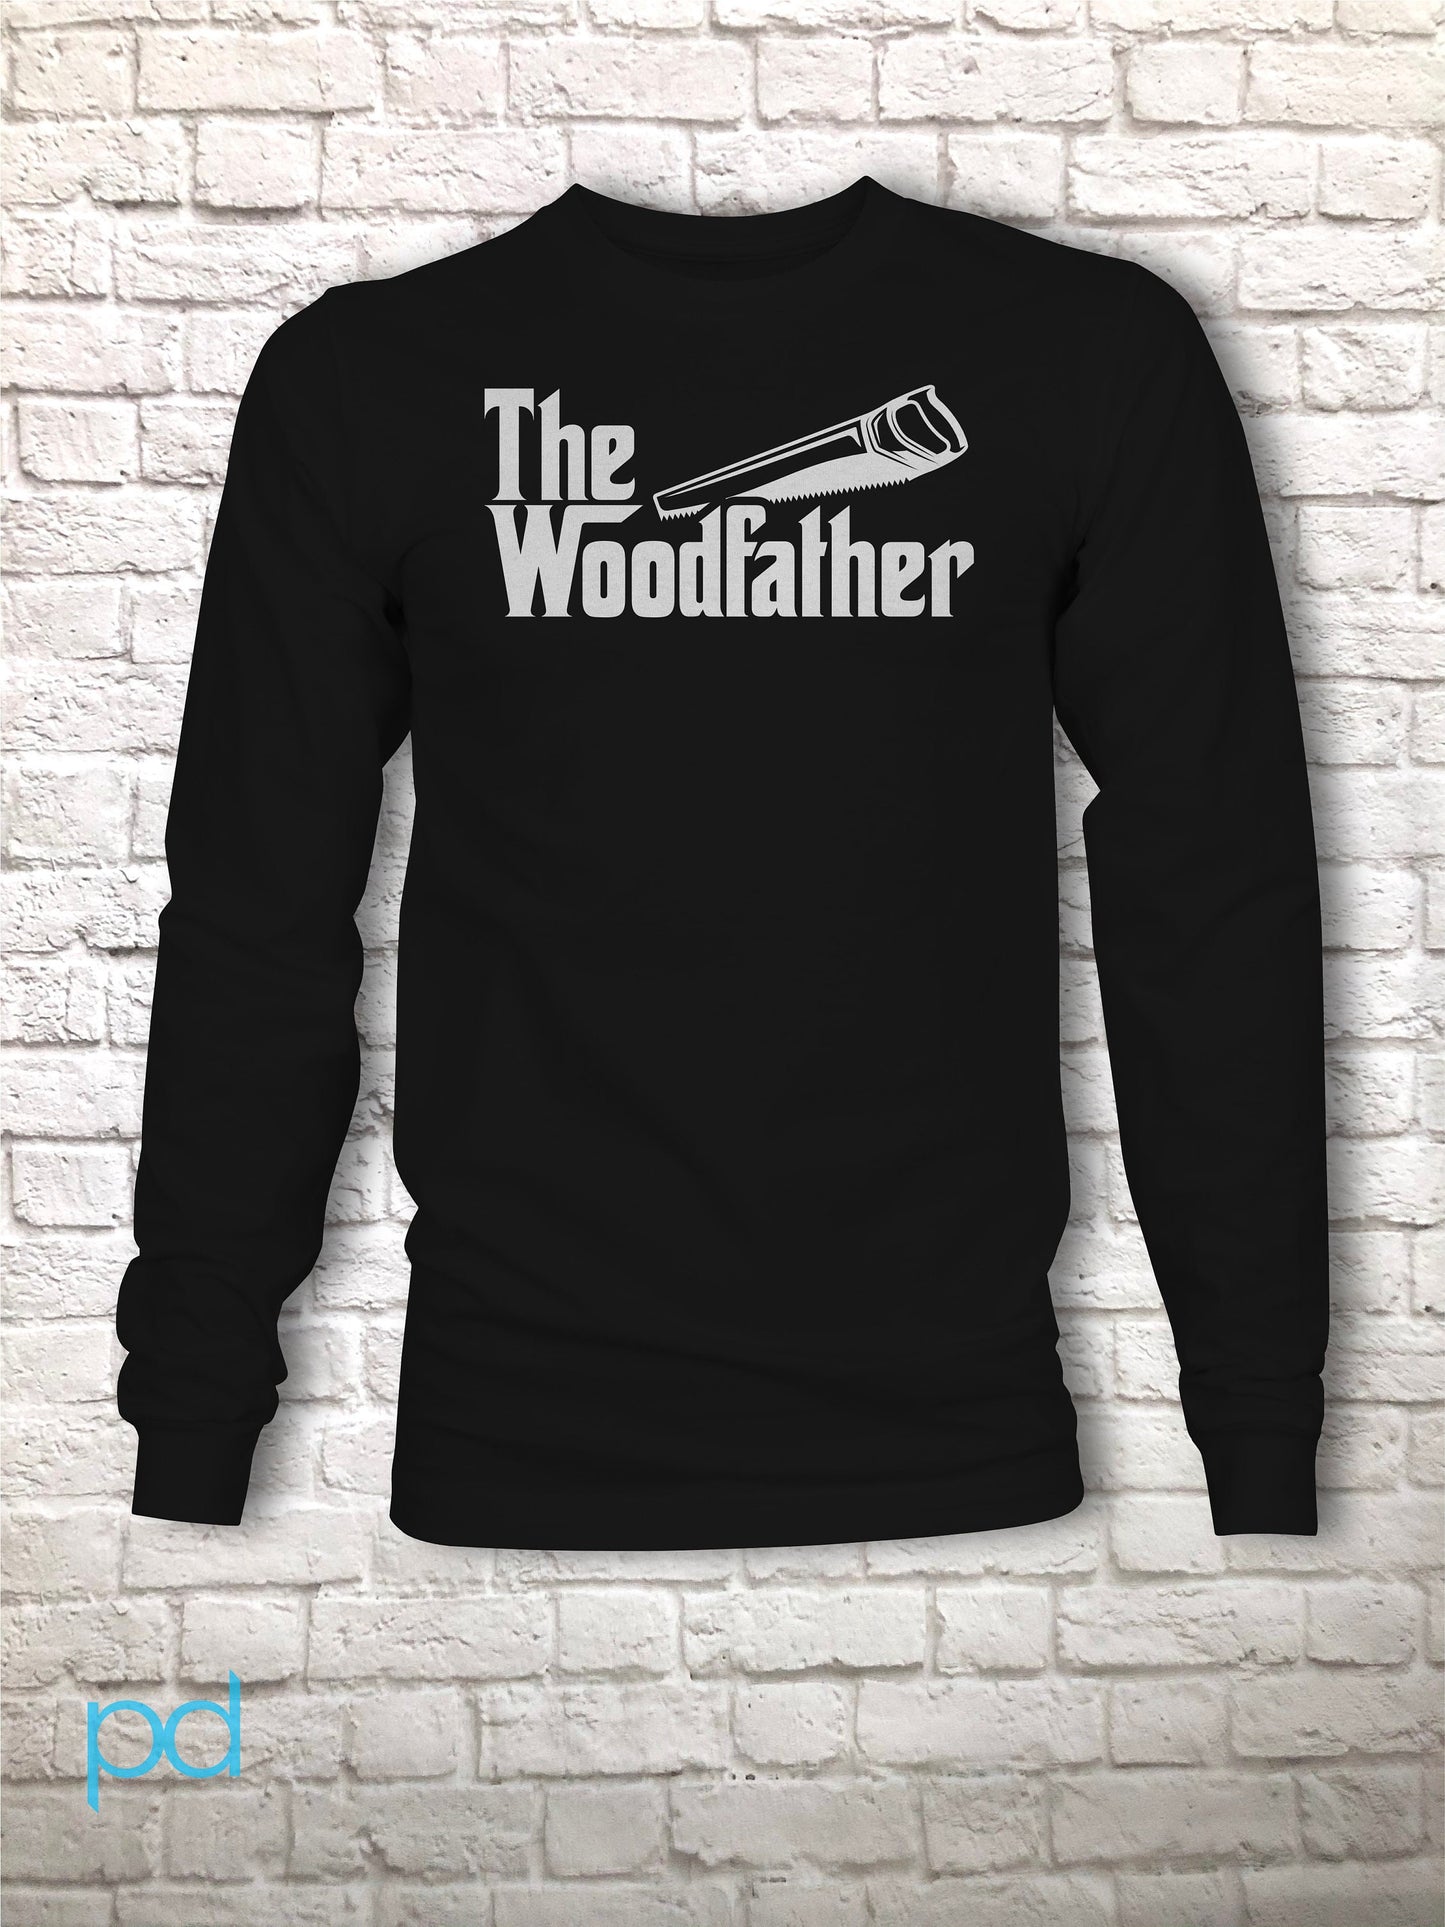 Funny Carpenter Long Sleeve T-shirt, Woodfather Parody Gift Idea, Humorous Woodworking Joiner Longsleeve Tee Shirt, Handsaw Clean